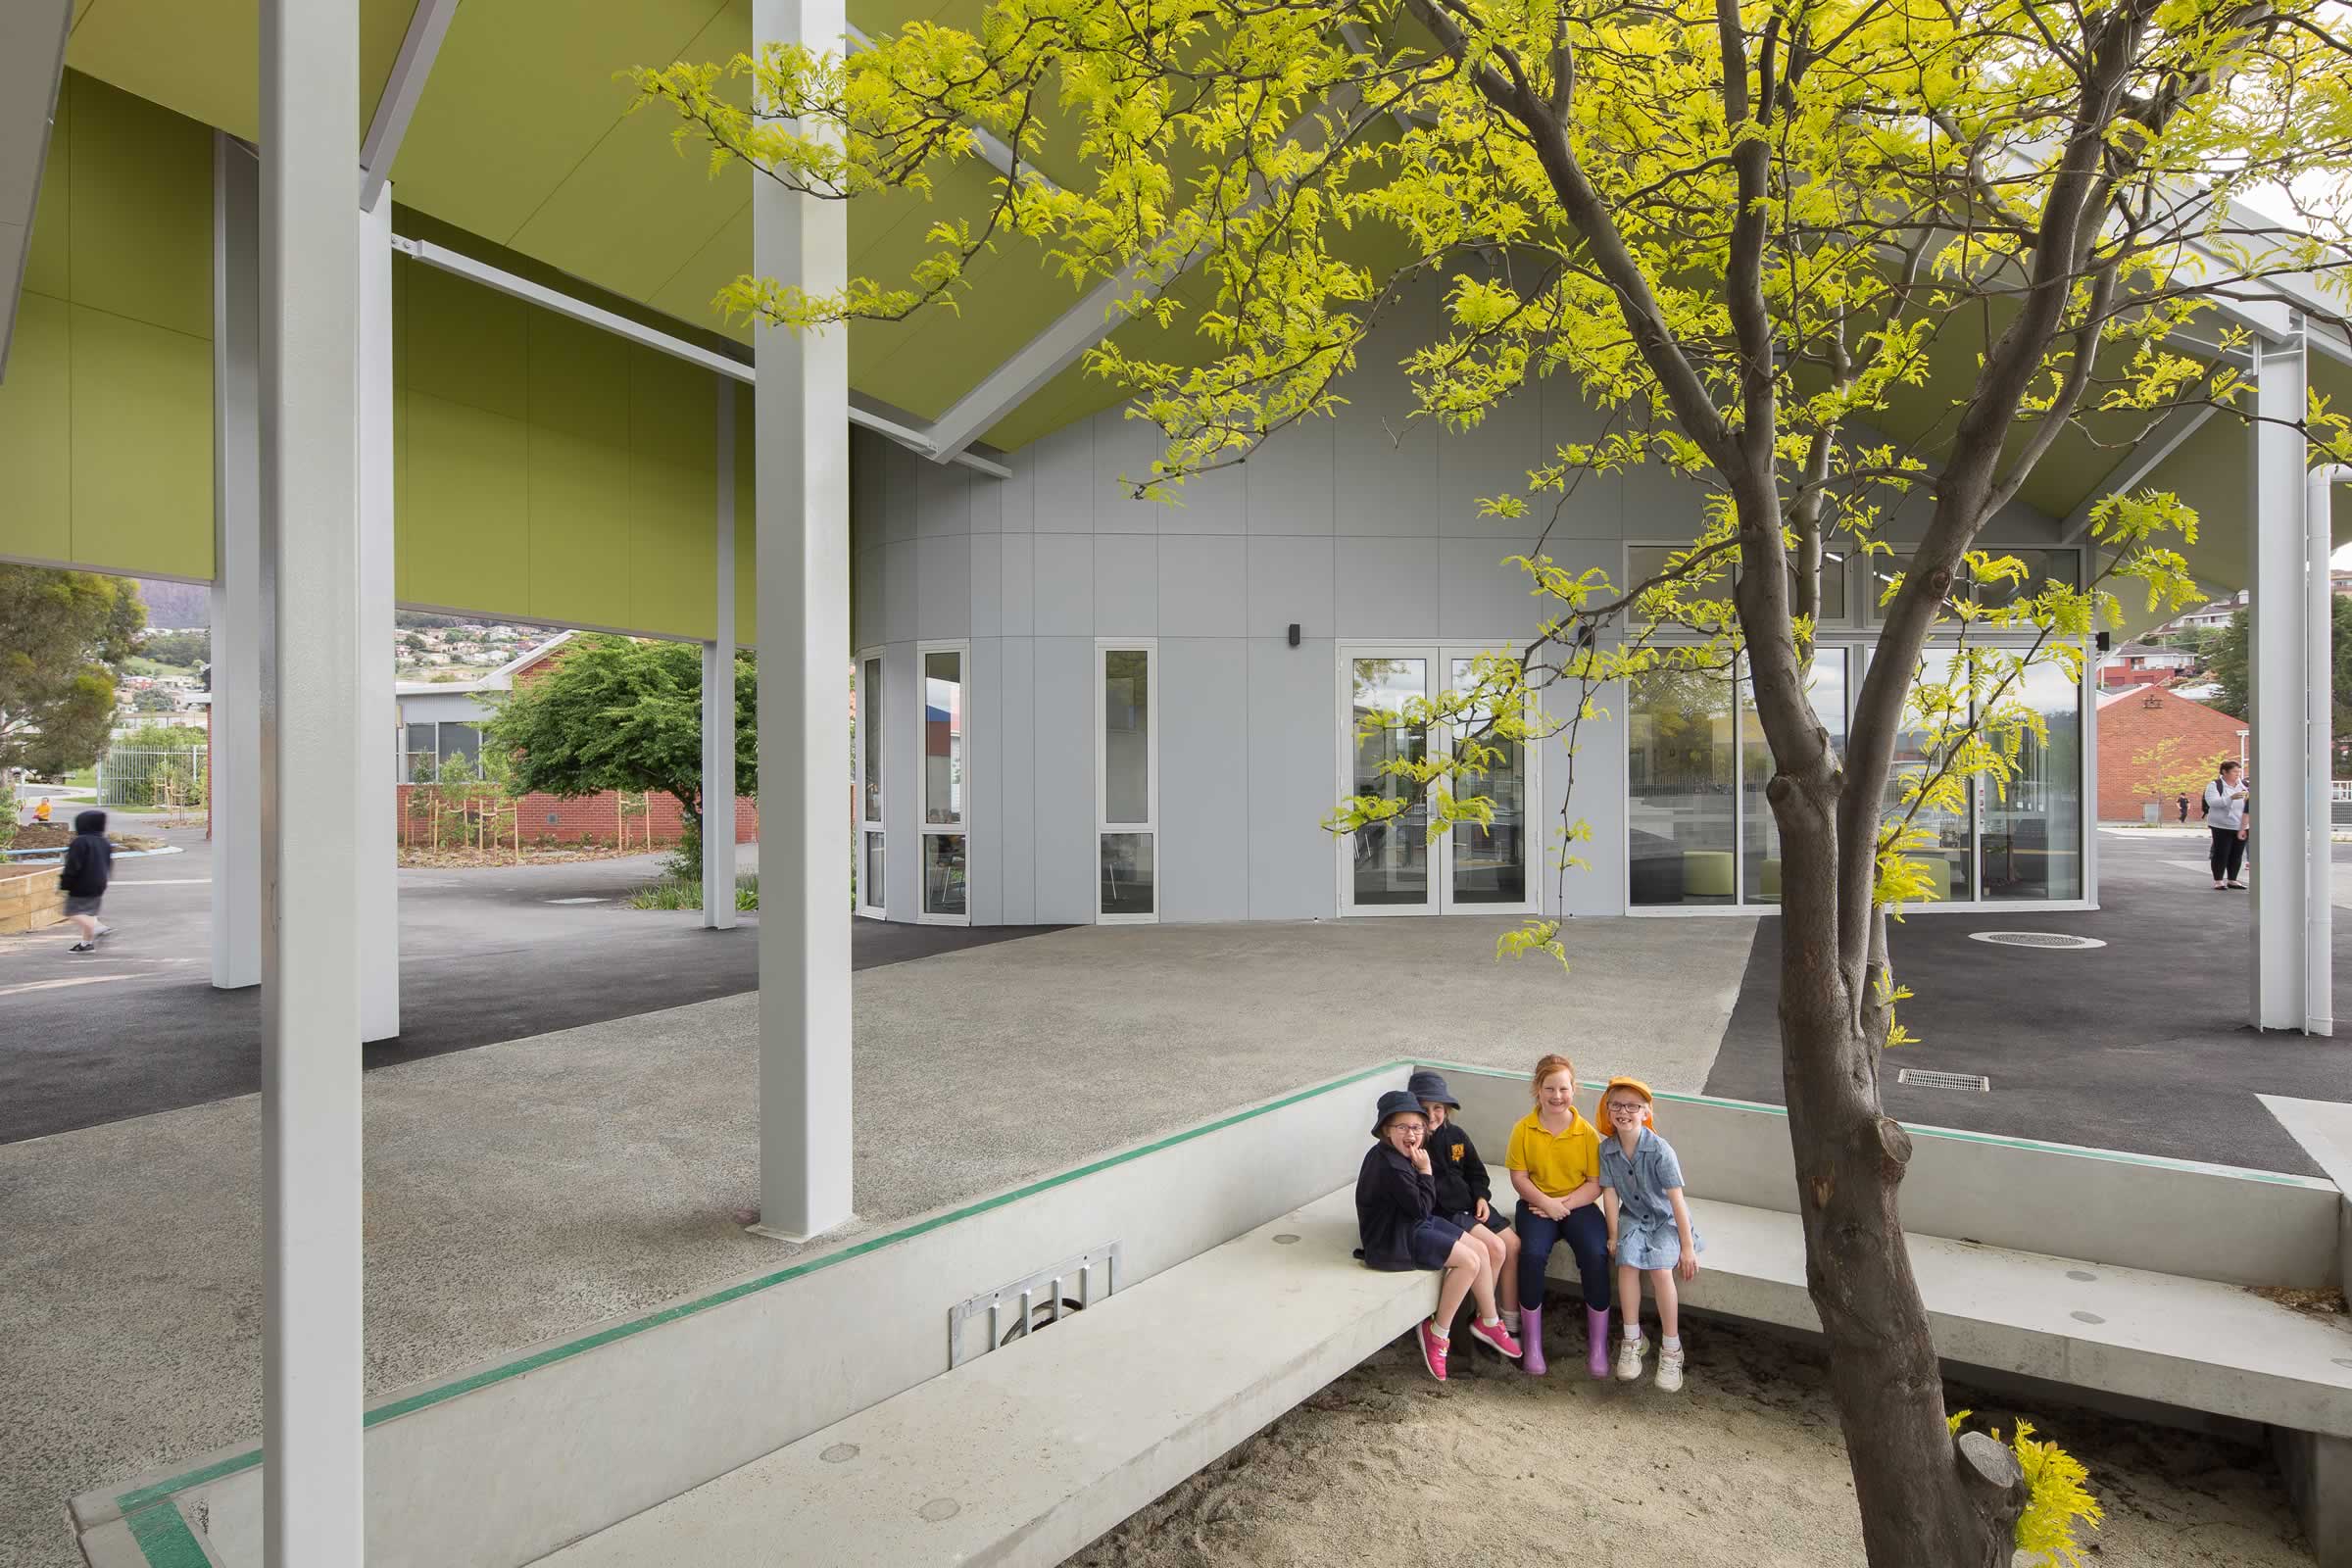 Glenorchy Primary School children, staff and parents benefit from safe environments with easy passive surveillance of play and meeting areas. Photo by Thomas Ryan.